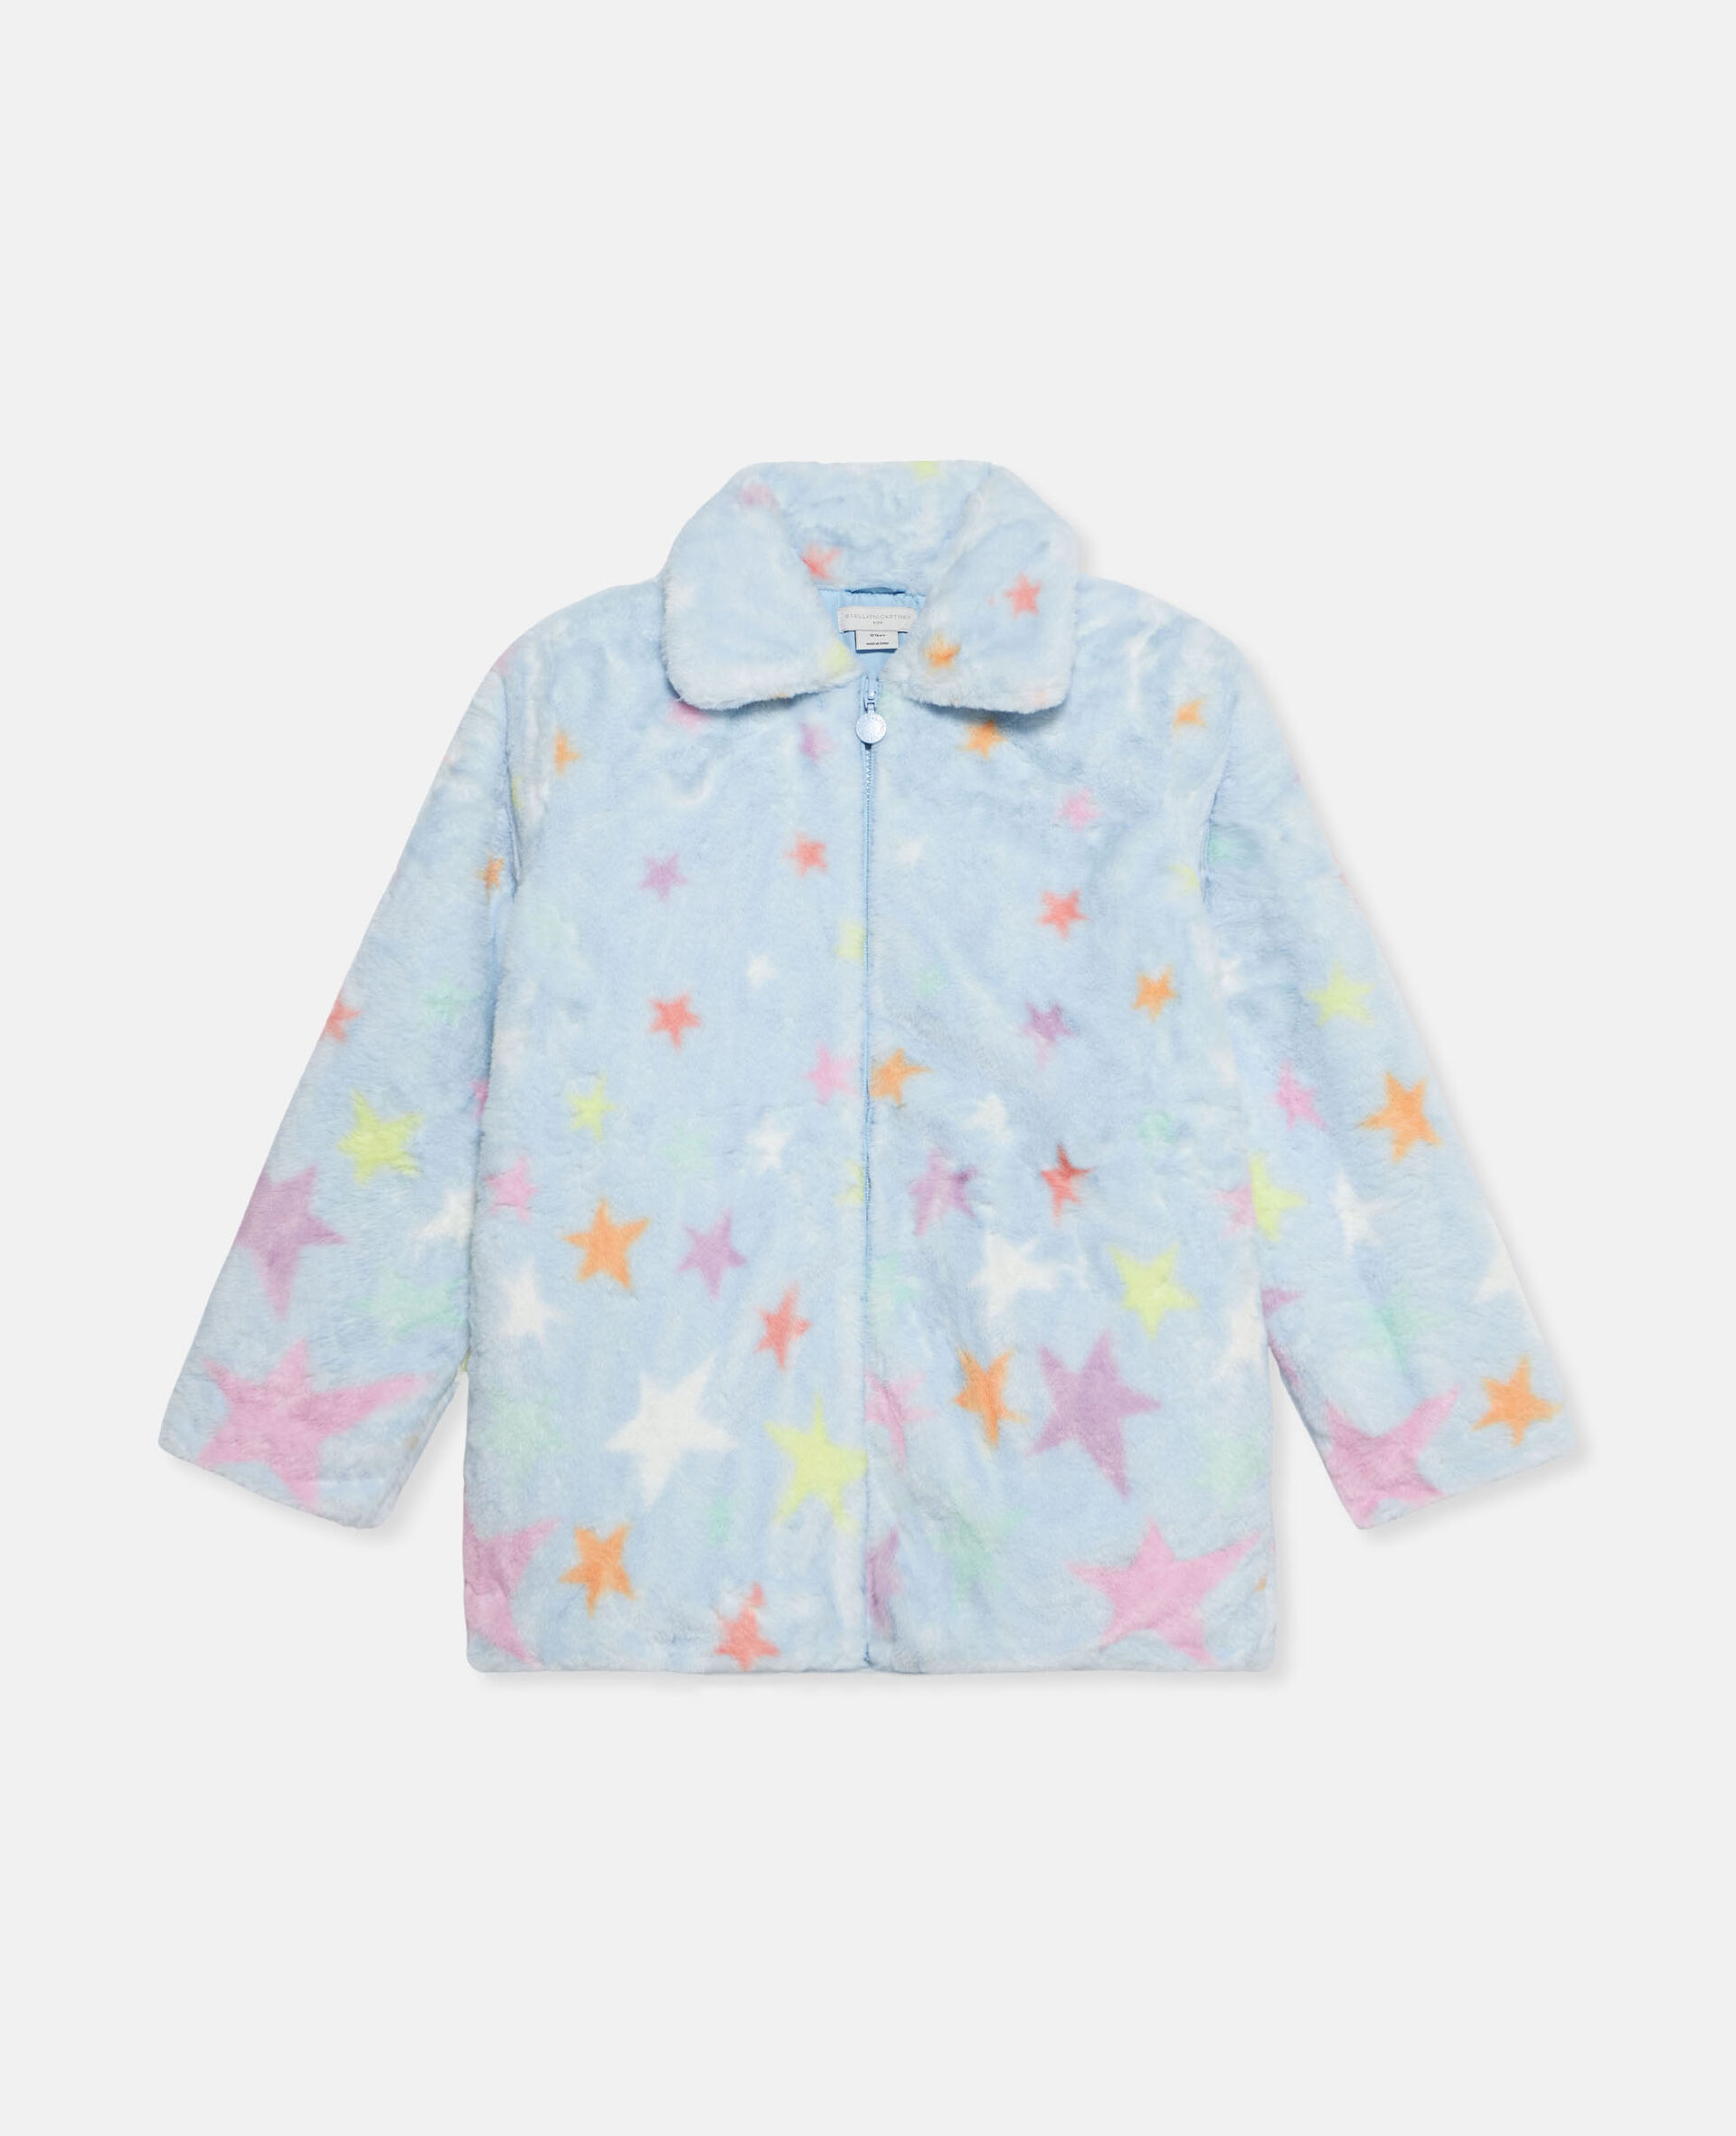 Star Print Fluffy Collared Jacket-Multicoloured-large image number 0